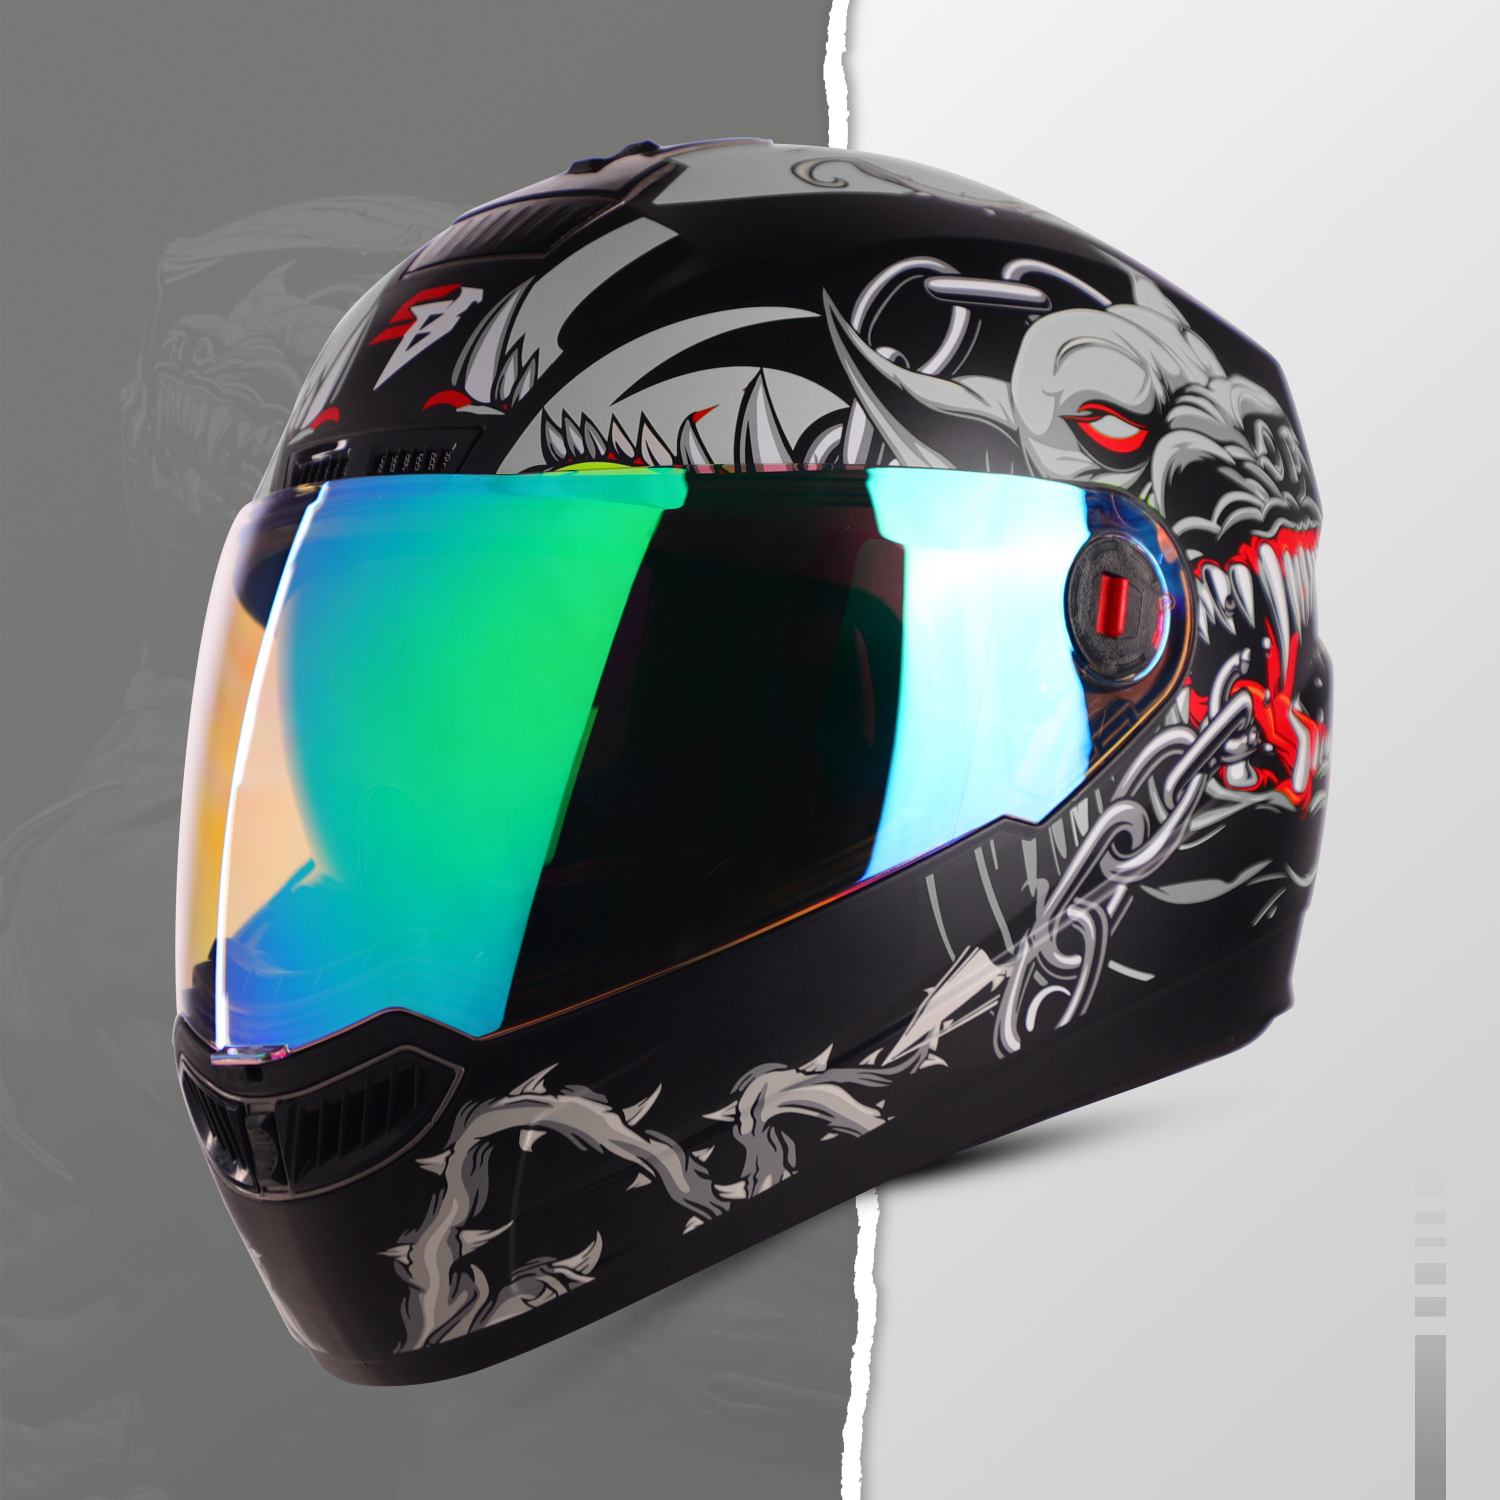 Steelbird SBA-1 Angry Dog ISI Certified Full Face Graphic Helmet For Men And Women With Inner Smoke Sun Shield (Glossy Black Grey With Night Vision Green Visor)